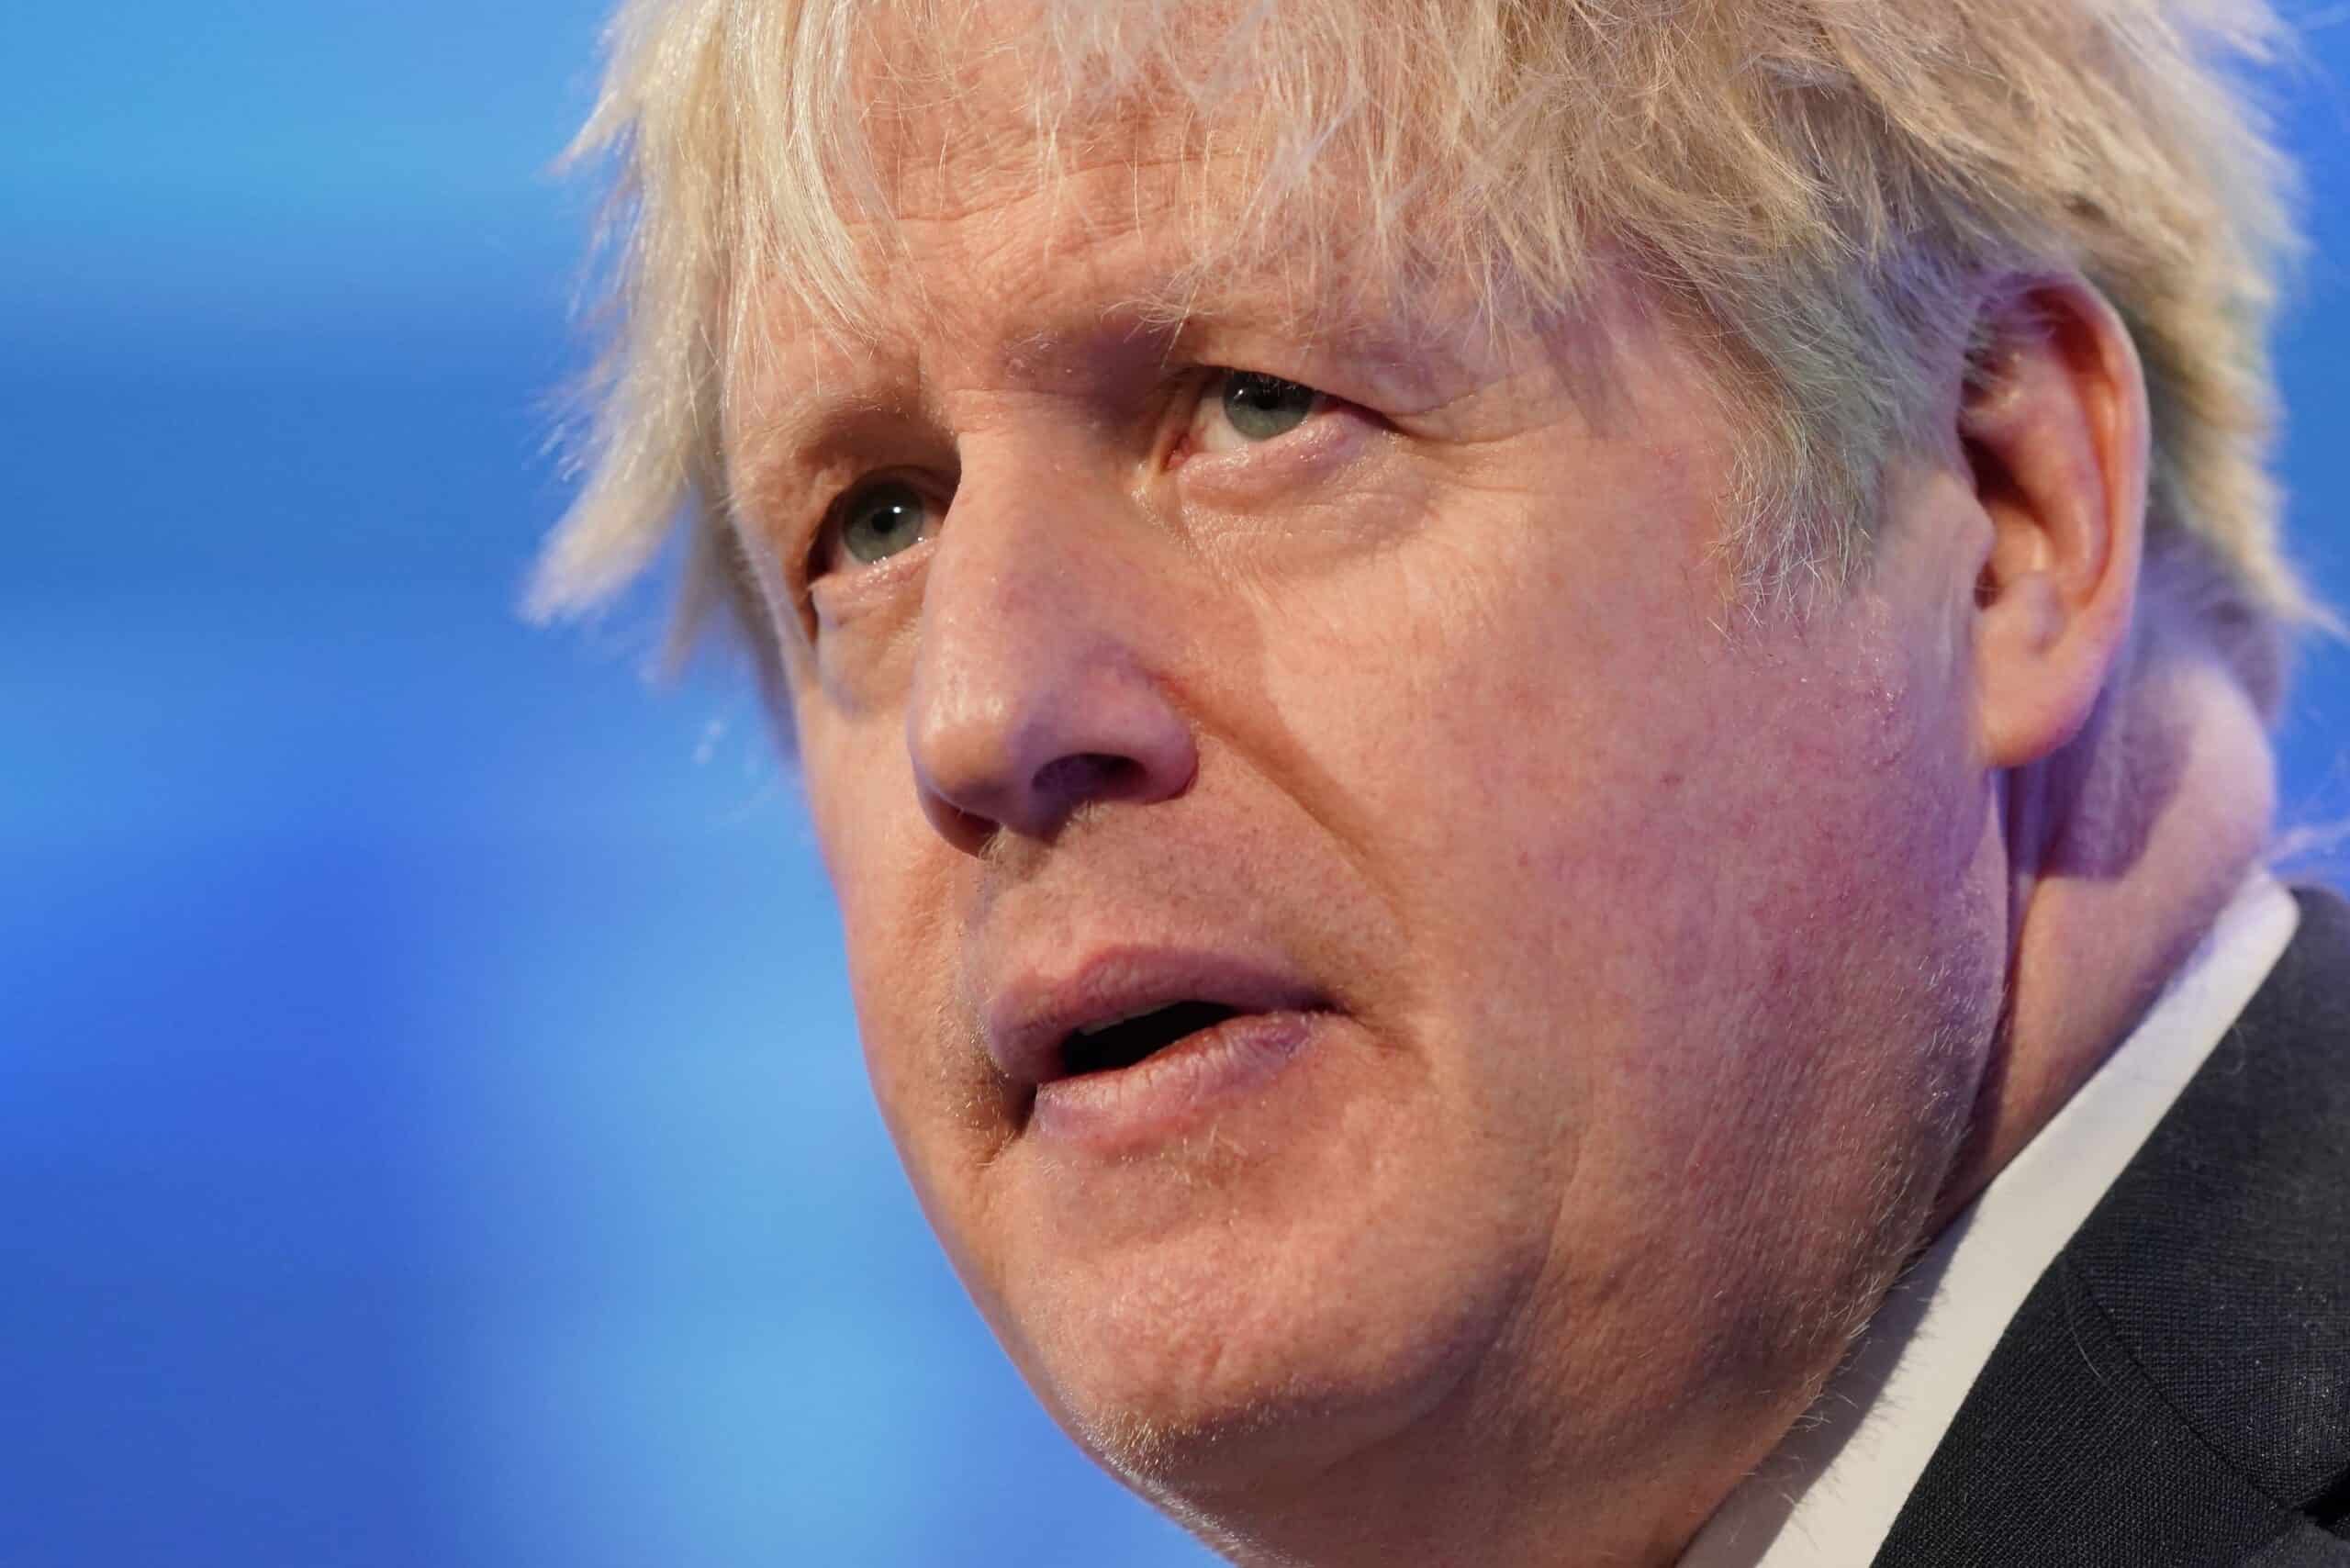 ‘We’ve got no plan. What will we do?’: Boris Johnson’s shock at Brexit result revealed in new book